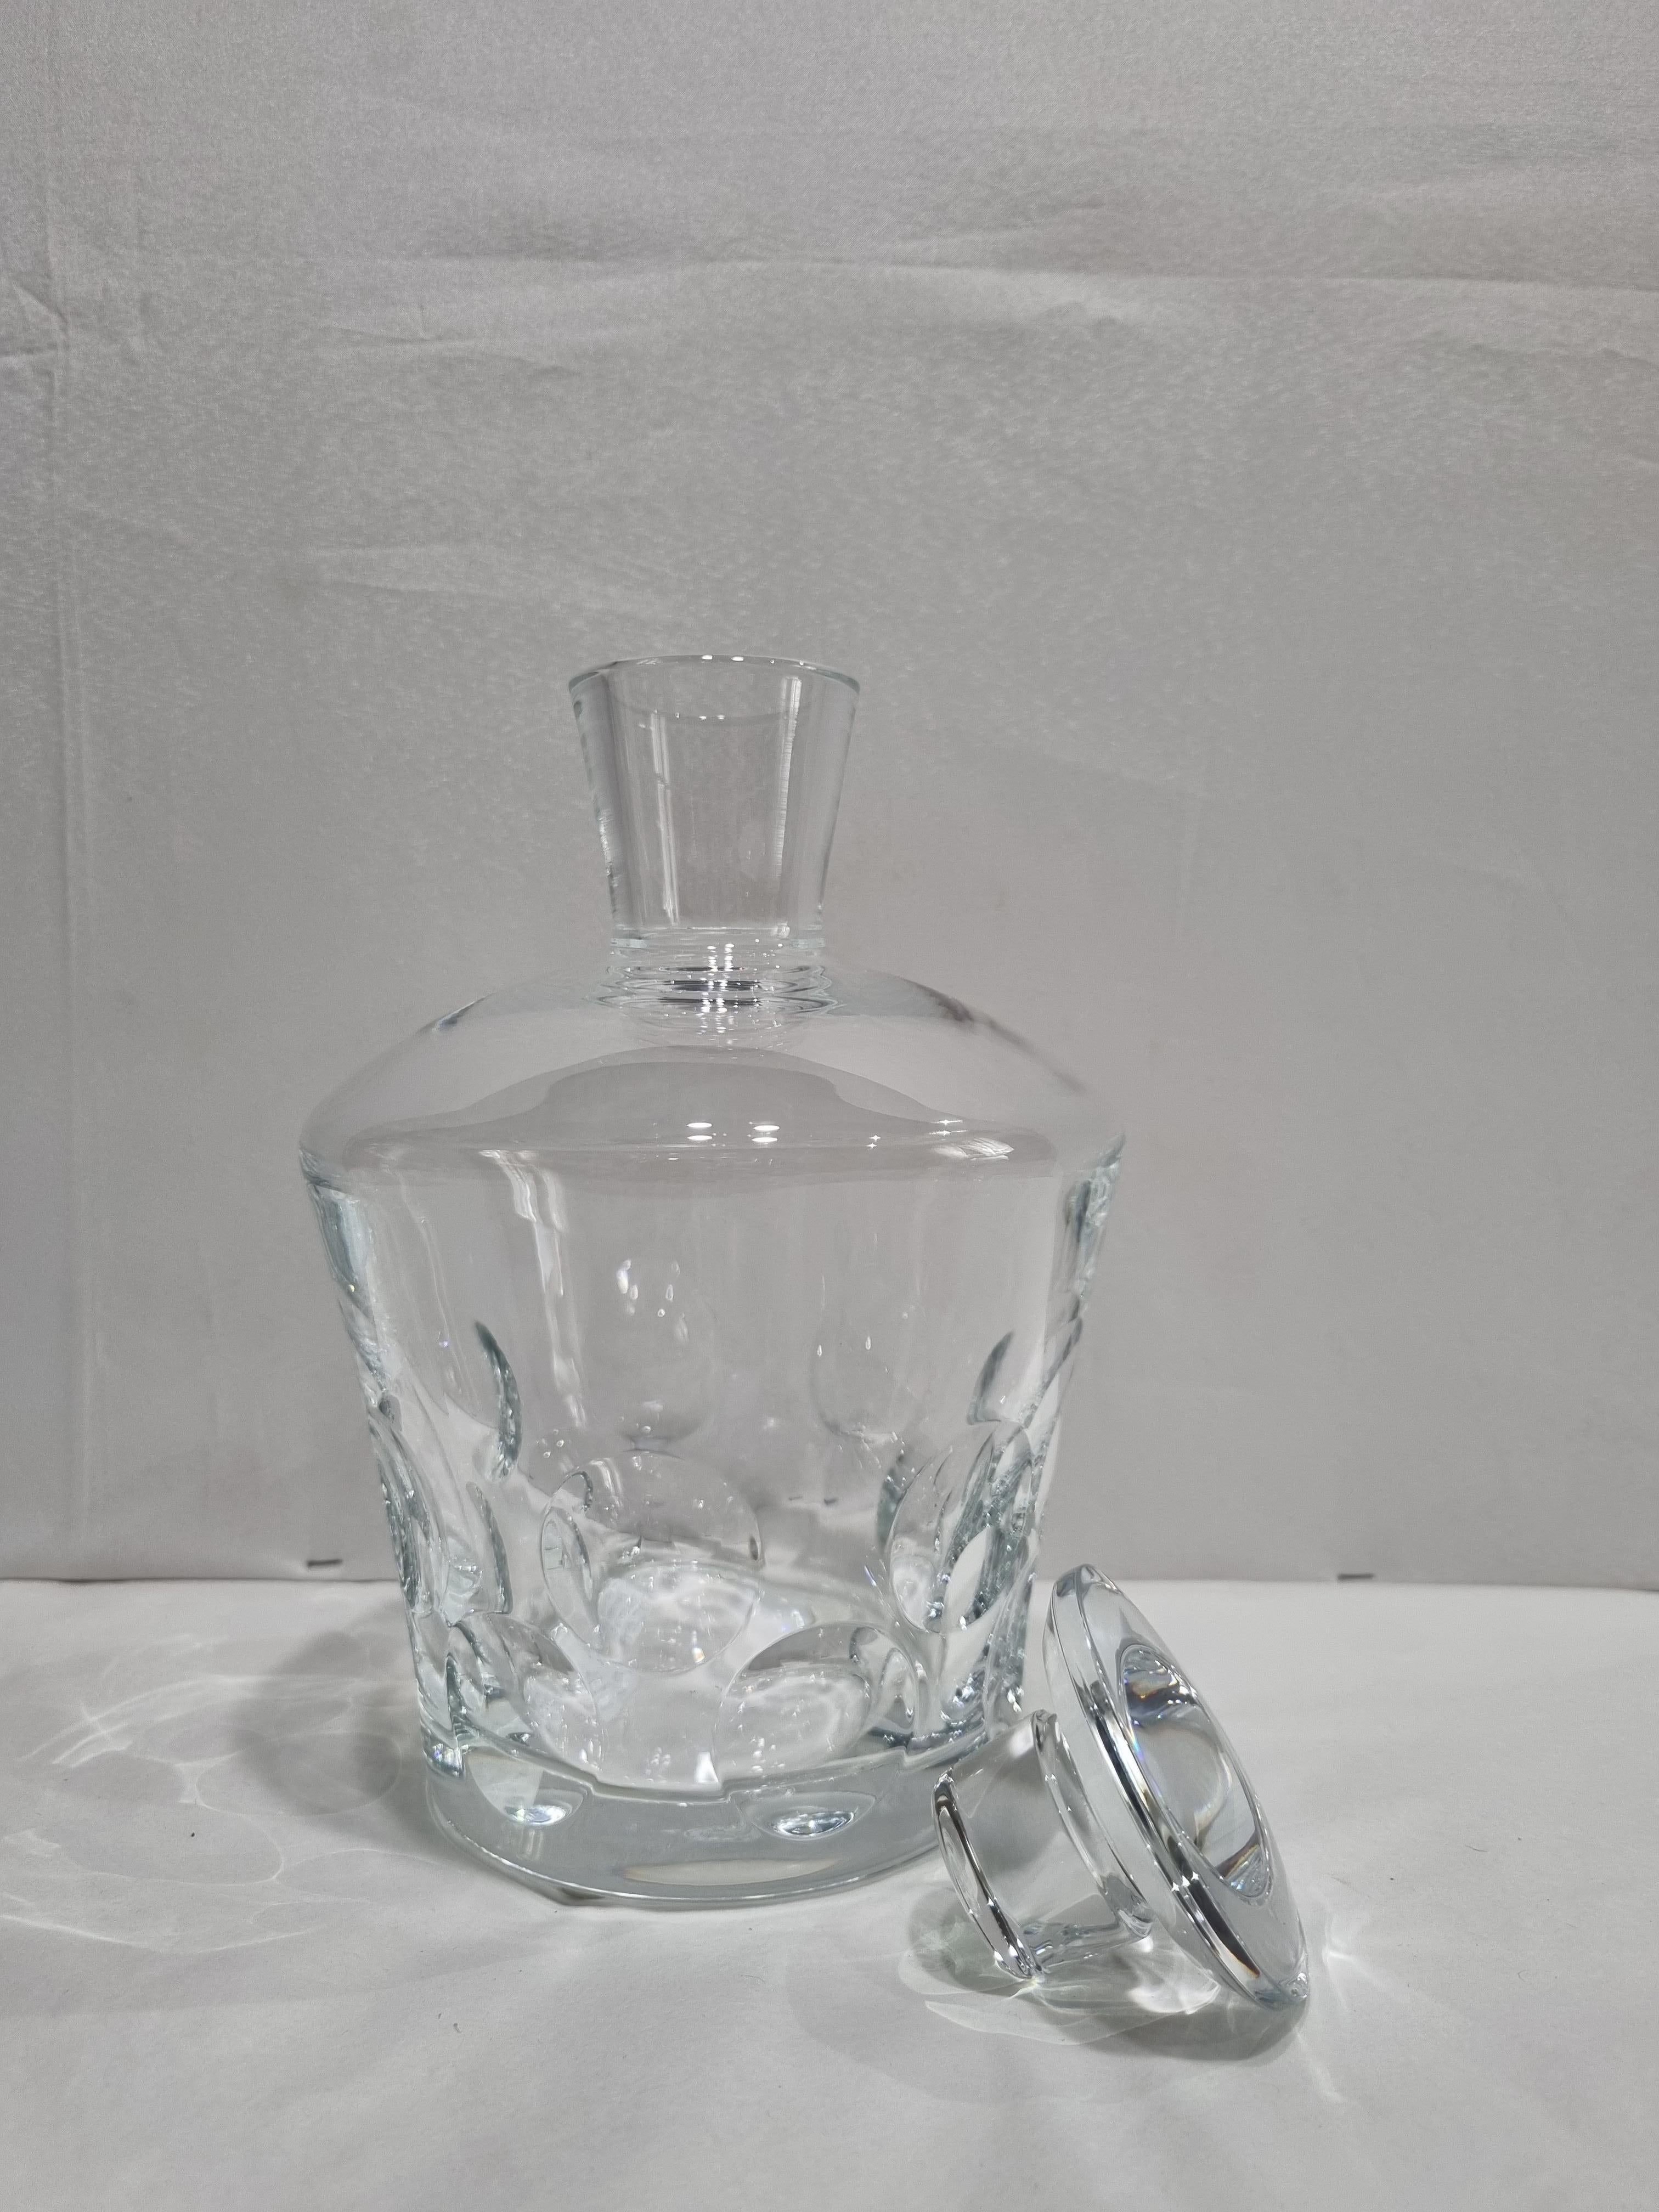 The Béluga decanter and tumblers, designed for Baccarat by Savinel and Rozé, is the perfect vessel in which to store and taste your whisky.
Just as whiskey—a spirit whose quality is strictly regulated —is about the art of distillation, Baccarat is